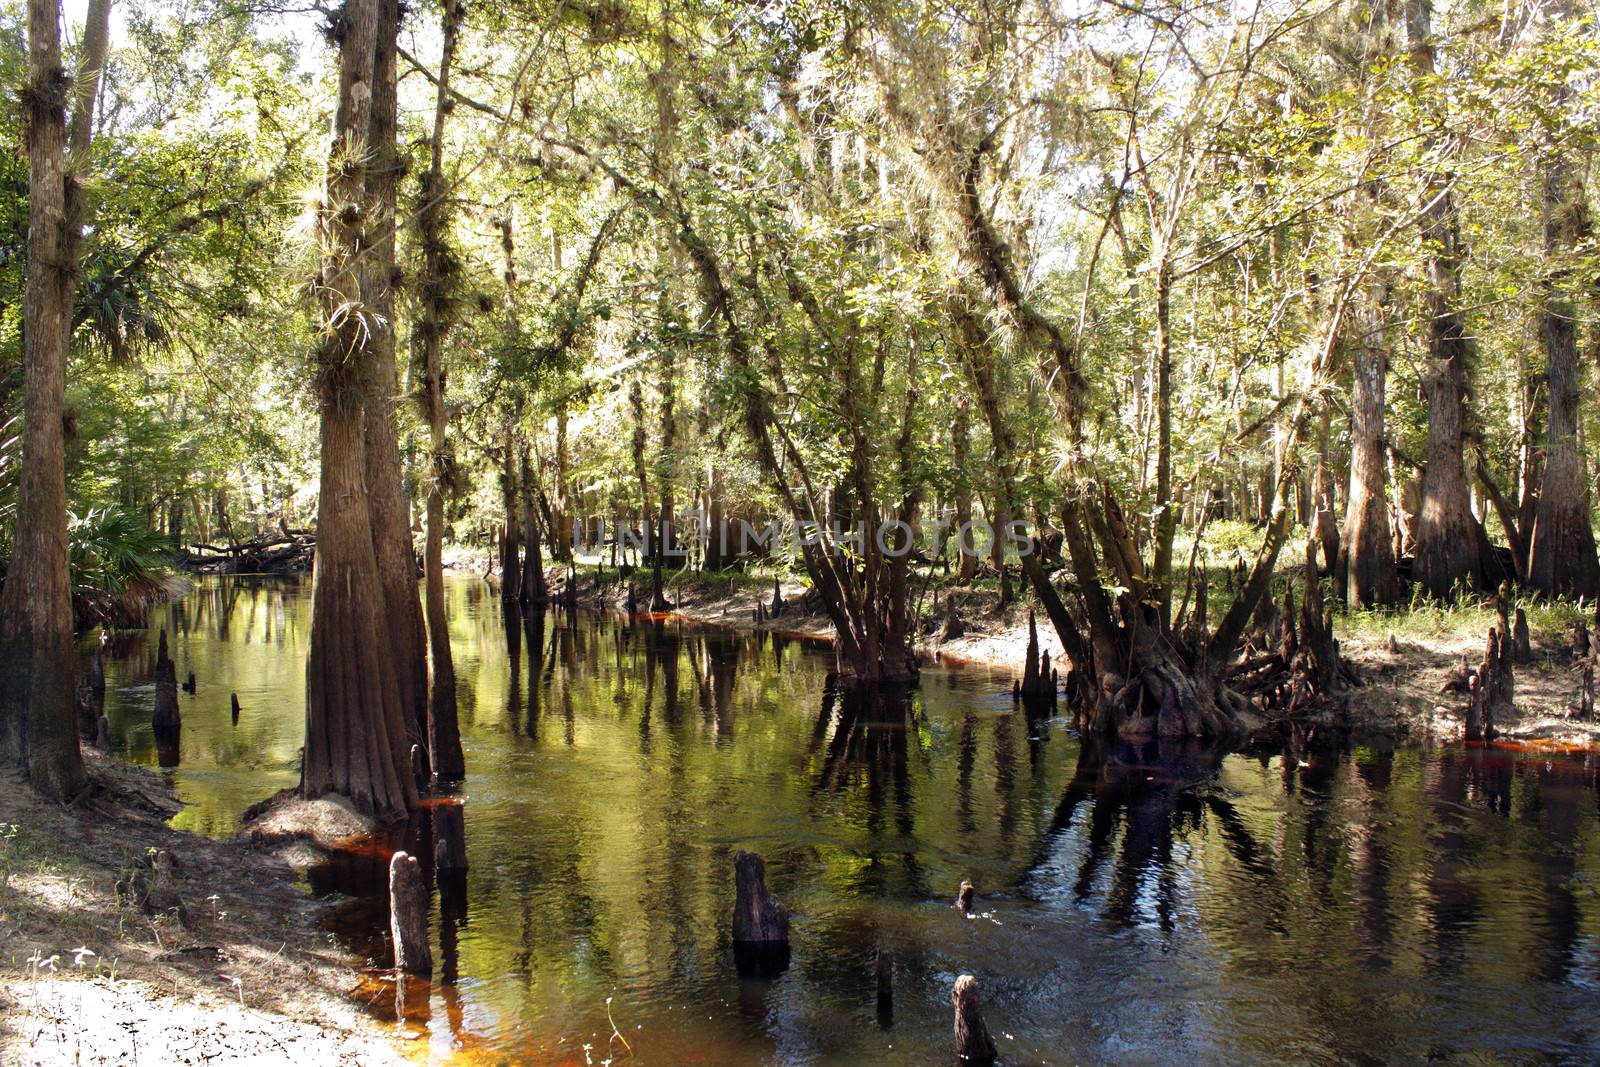 Cypress "knees" in a small tropical river.